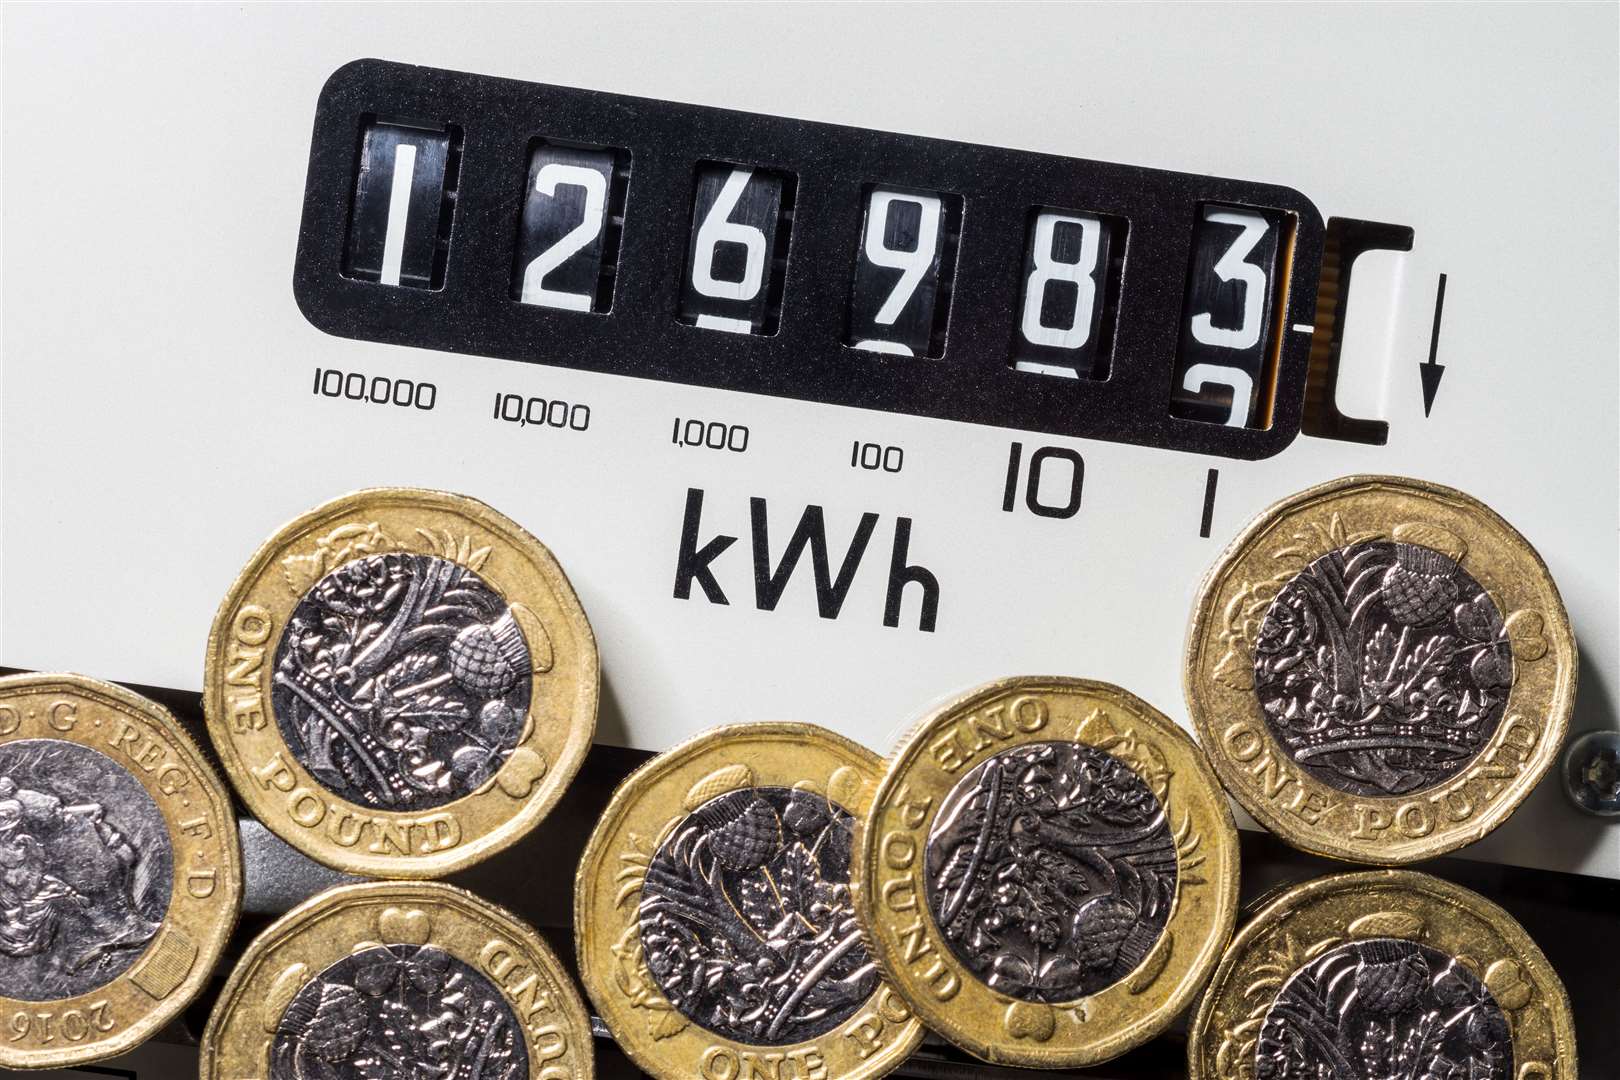 There are only five days left for households to cash in all their vouchers worth £400 before the UK Government’s Energy Bill Support closes on June 30.